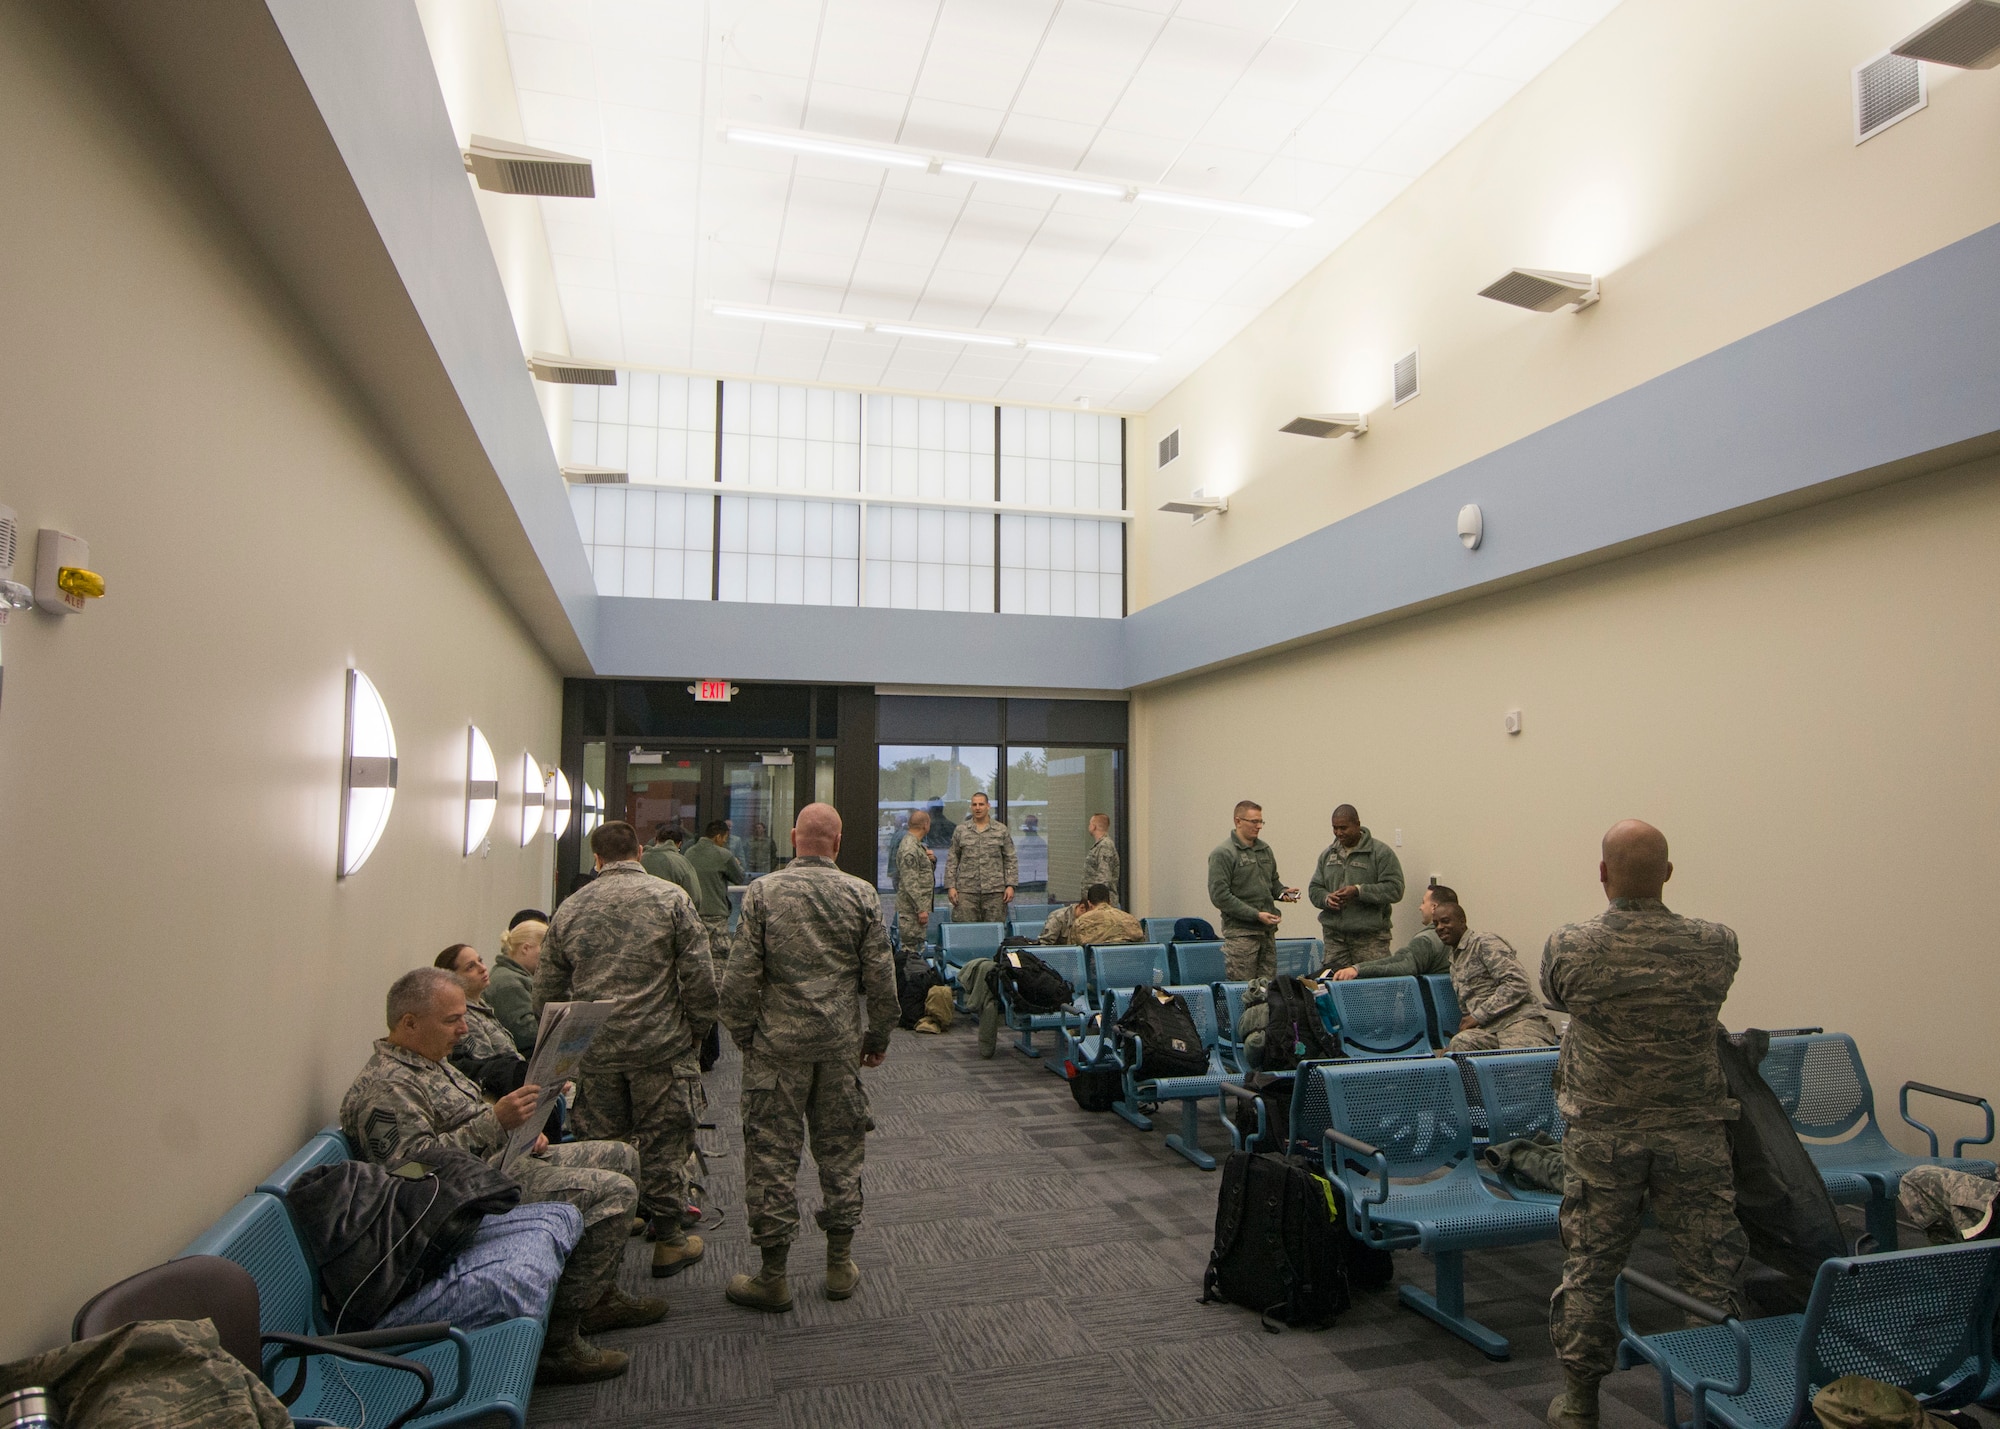 103rd’s newest facility ensures wing meets increasing global demands